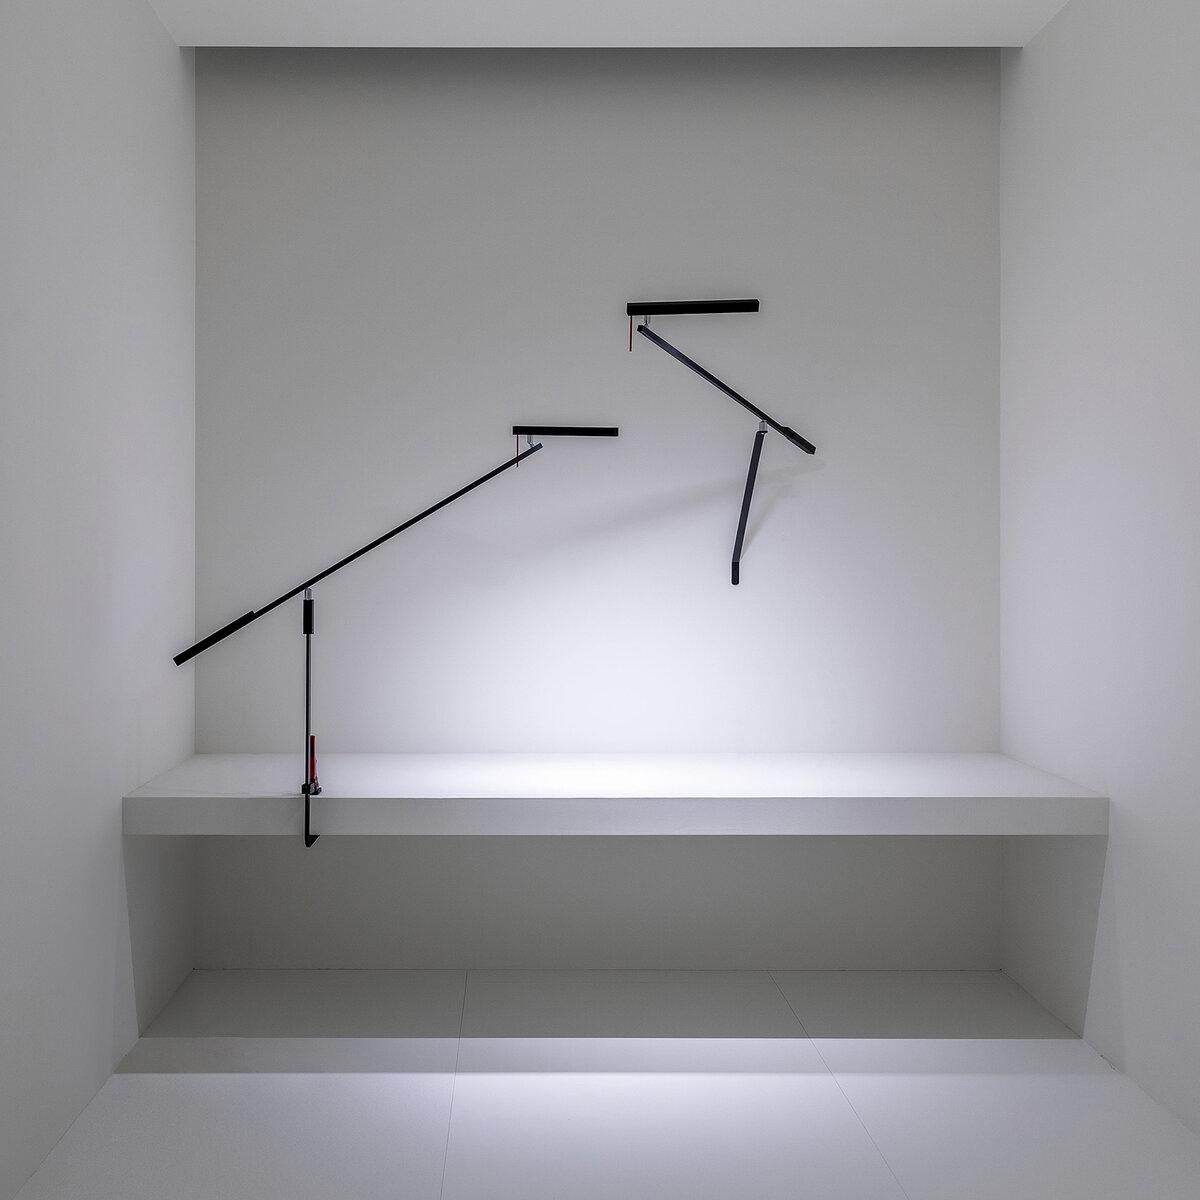 A lamp that can be positioned, balanced and turned,
but overall it produces a beautiful light on the table.
The oversized workshop-style clamp allows the light source to be positioned far from where the lamp is attached to the table, using three